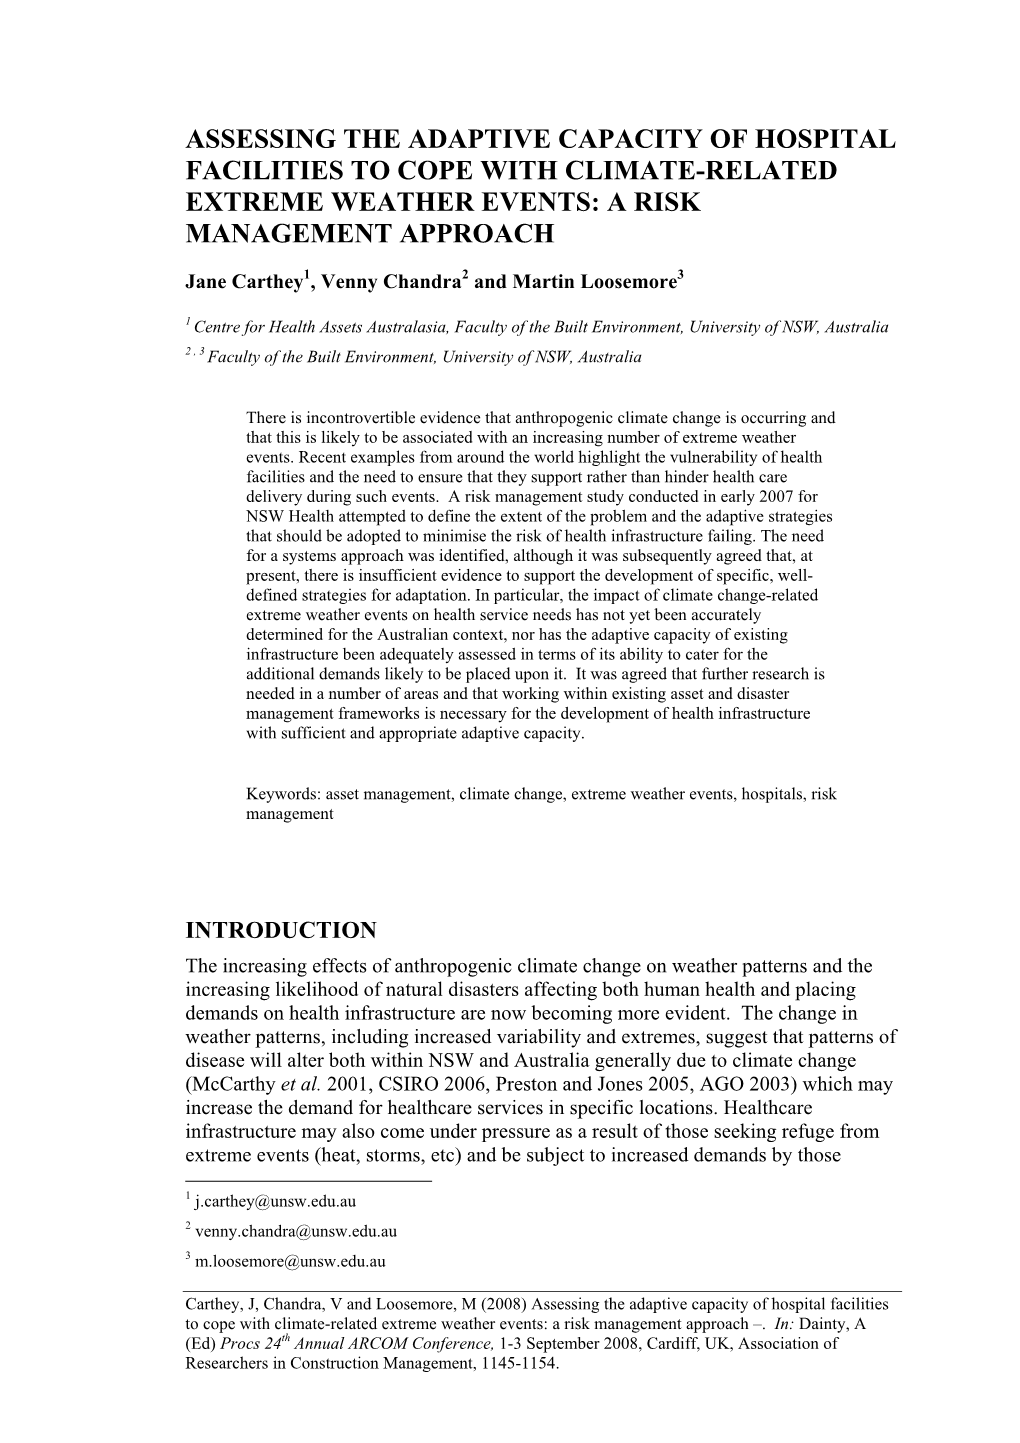 Assessing the Adaptive Capacity of Hospital Facilities to Cope with Climate-Related Extreme Weather Events: a Risk Management Approach